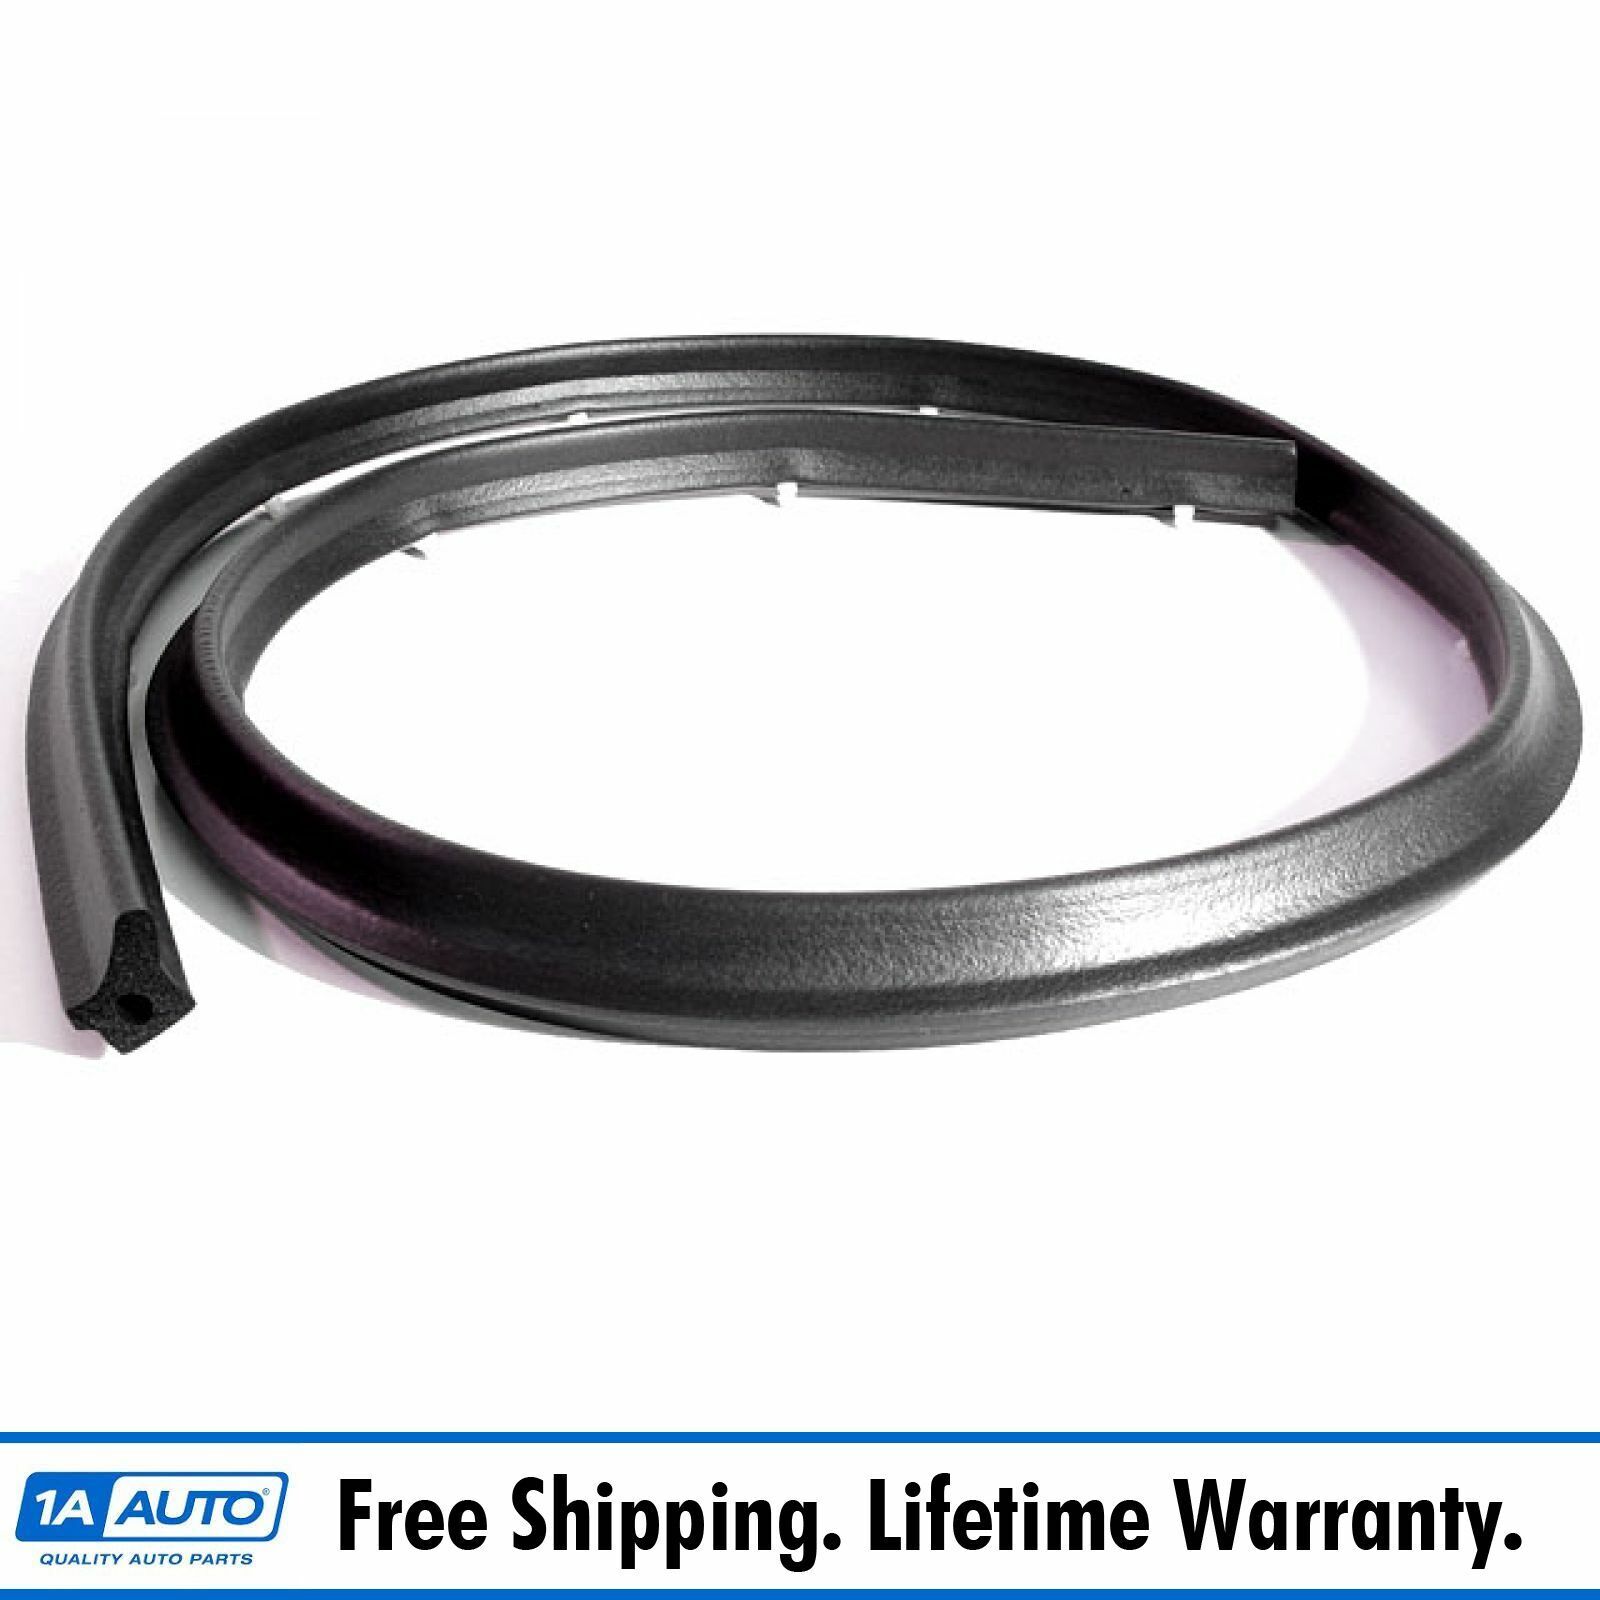 Convertible Top Header Seal Rubber Weatherstrip for Buick Chevy Pontiac Olds